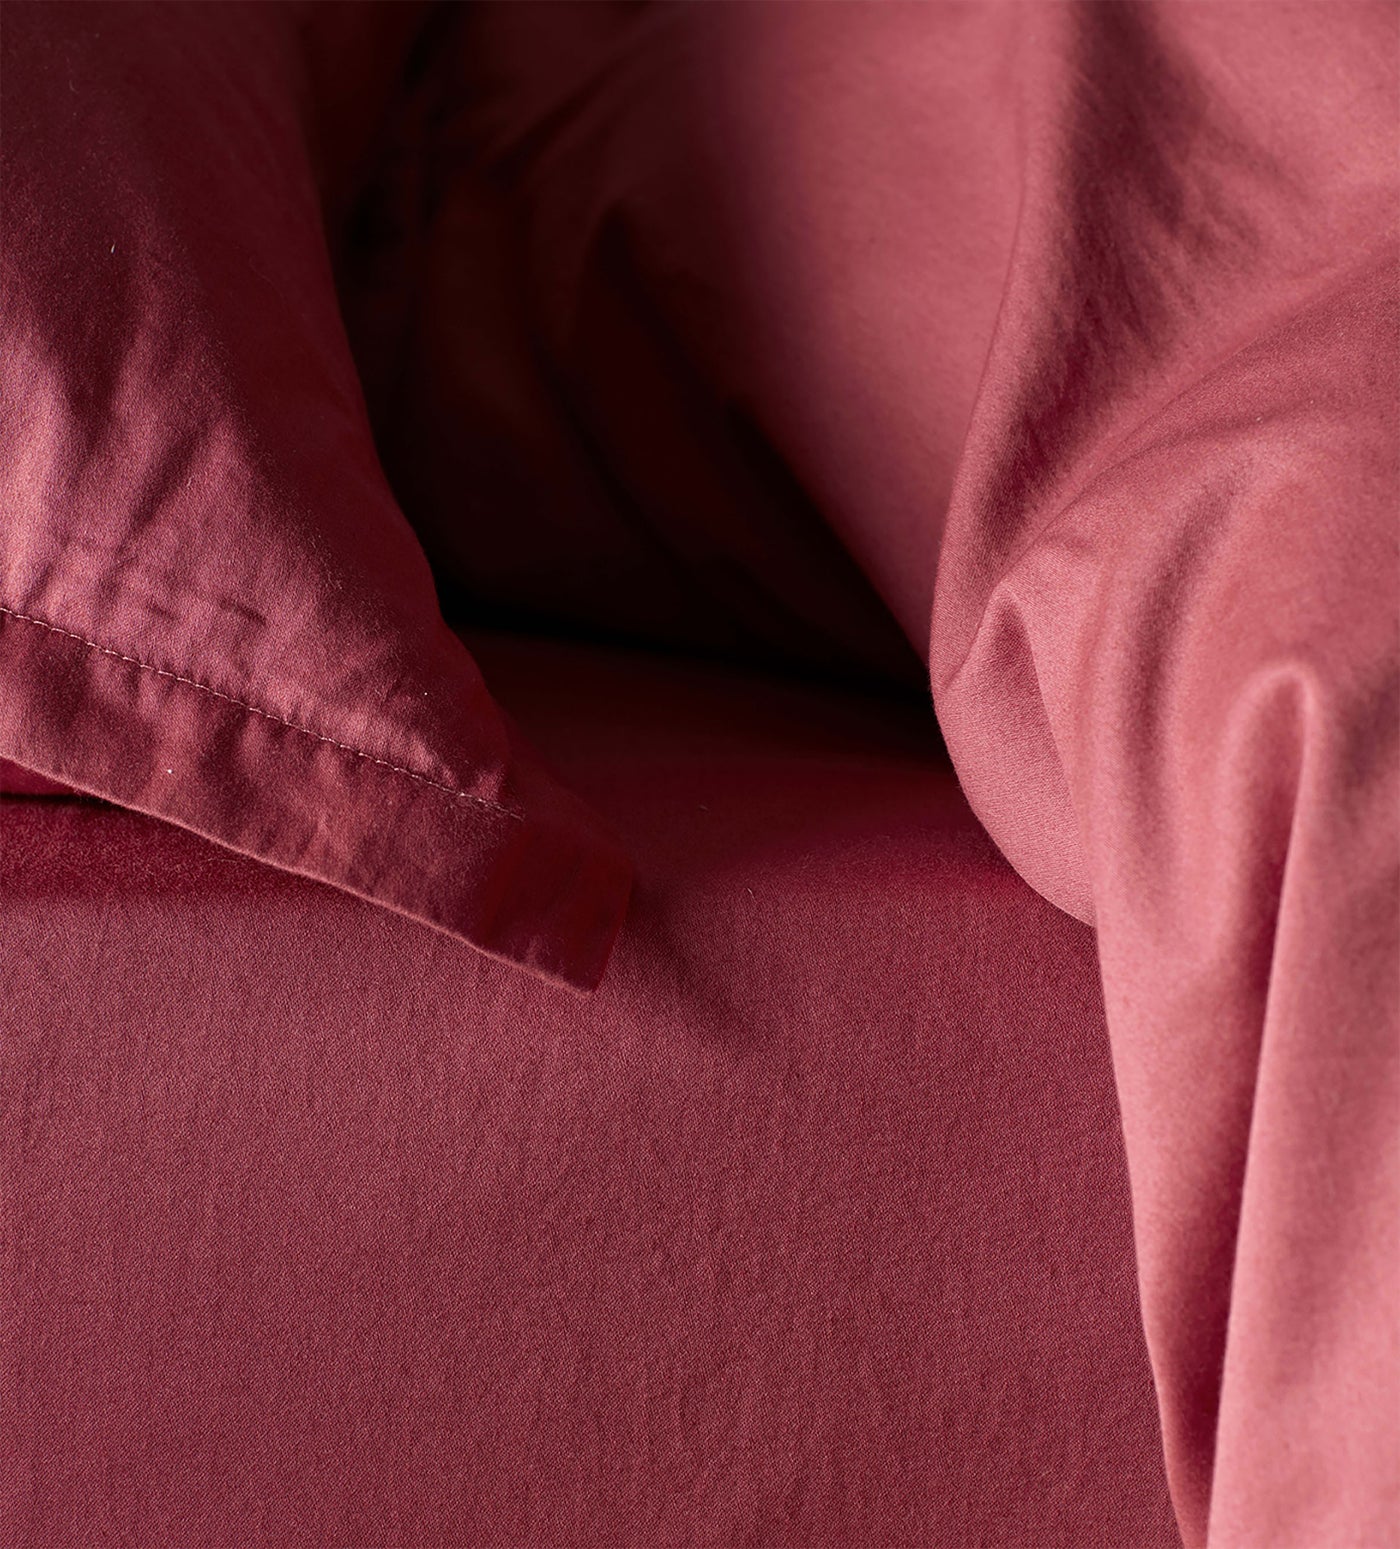 SUPER SOFT SATEEN RASPBERRY SORBET FITTED SHEET lower res